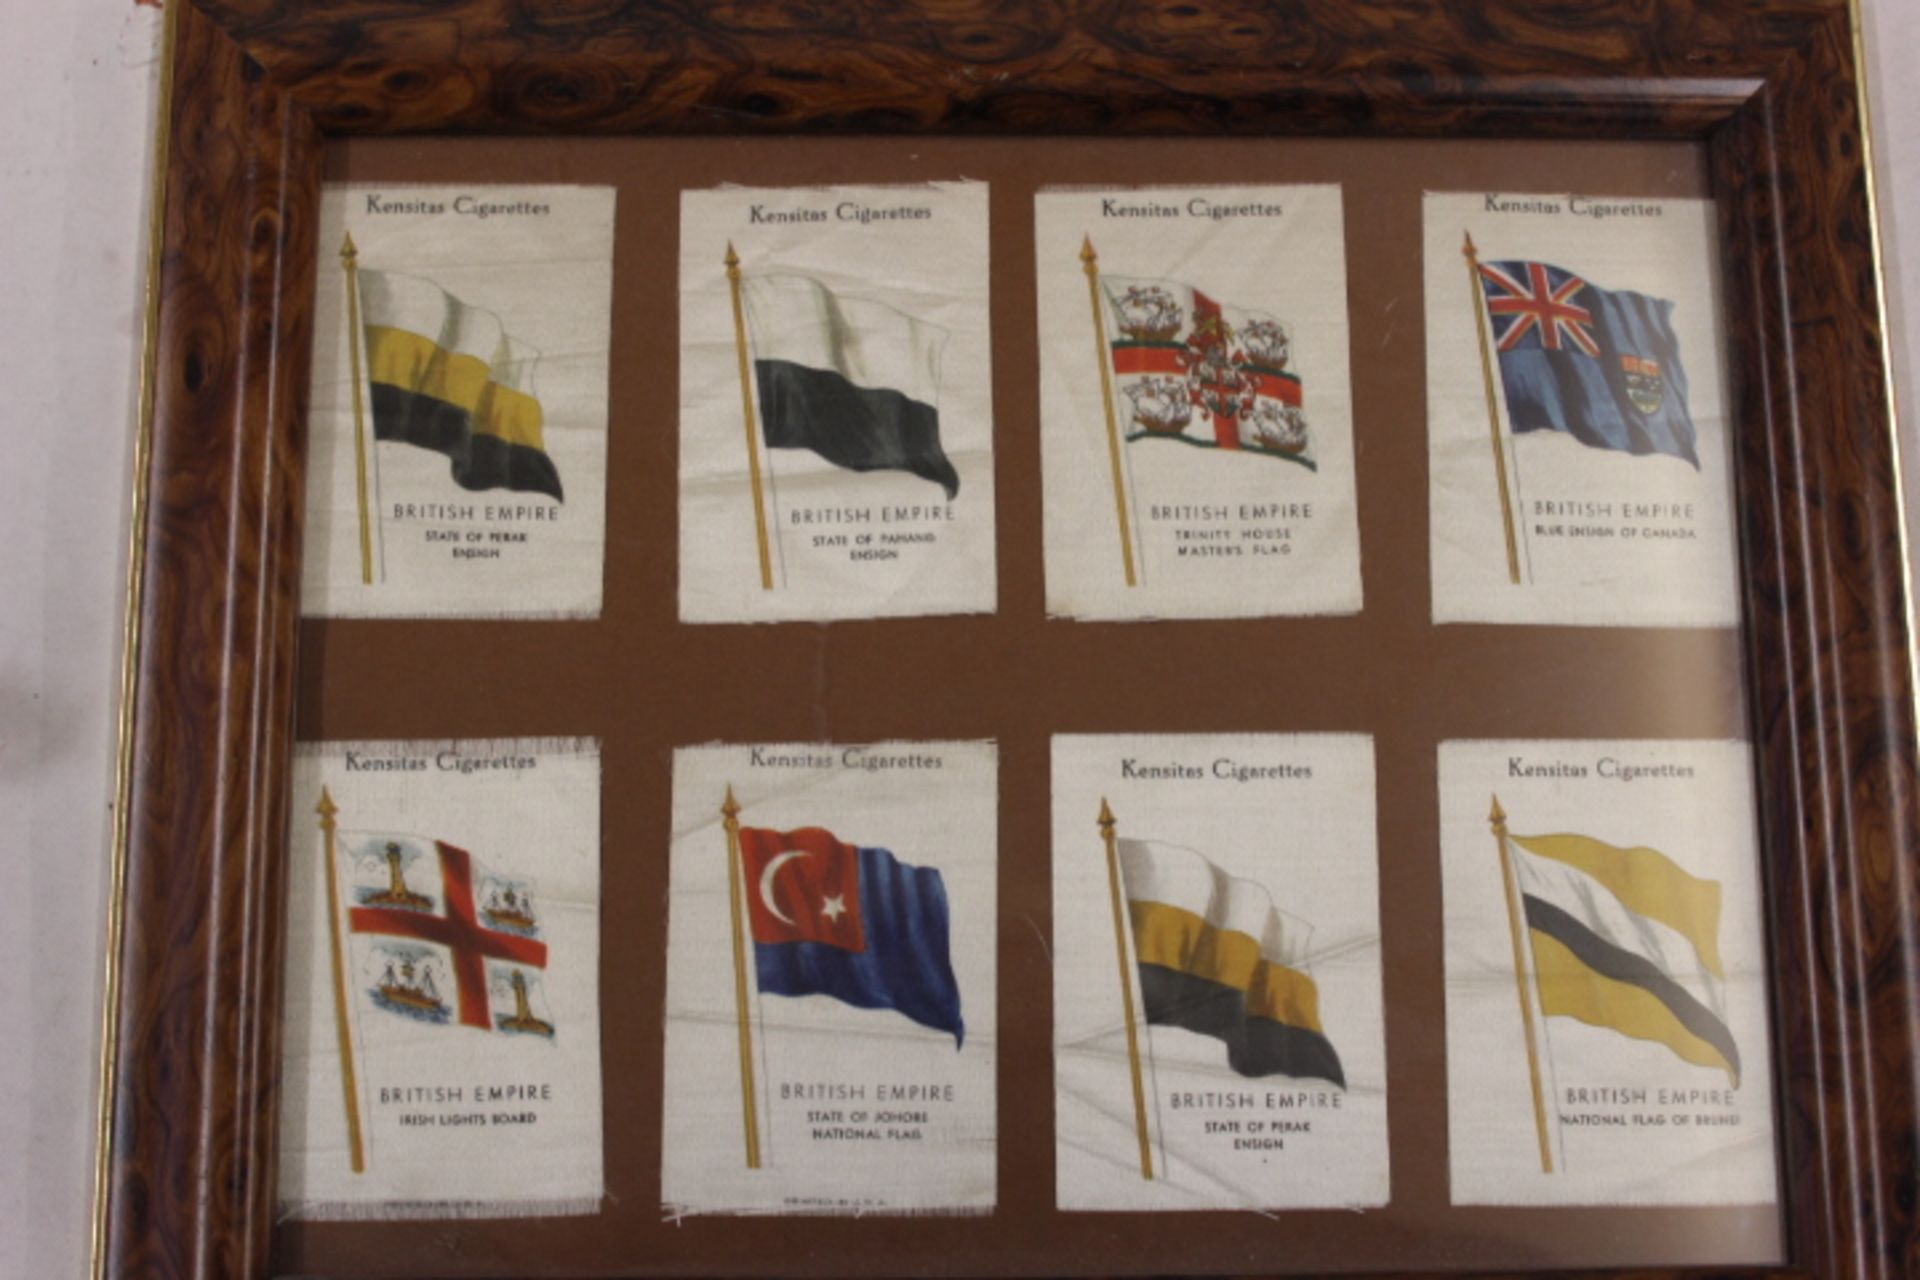 V 8 Kensitas Cigarettes silk pictures of British Empire Flags in a frame